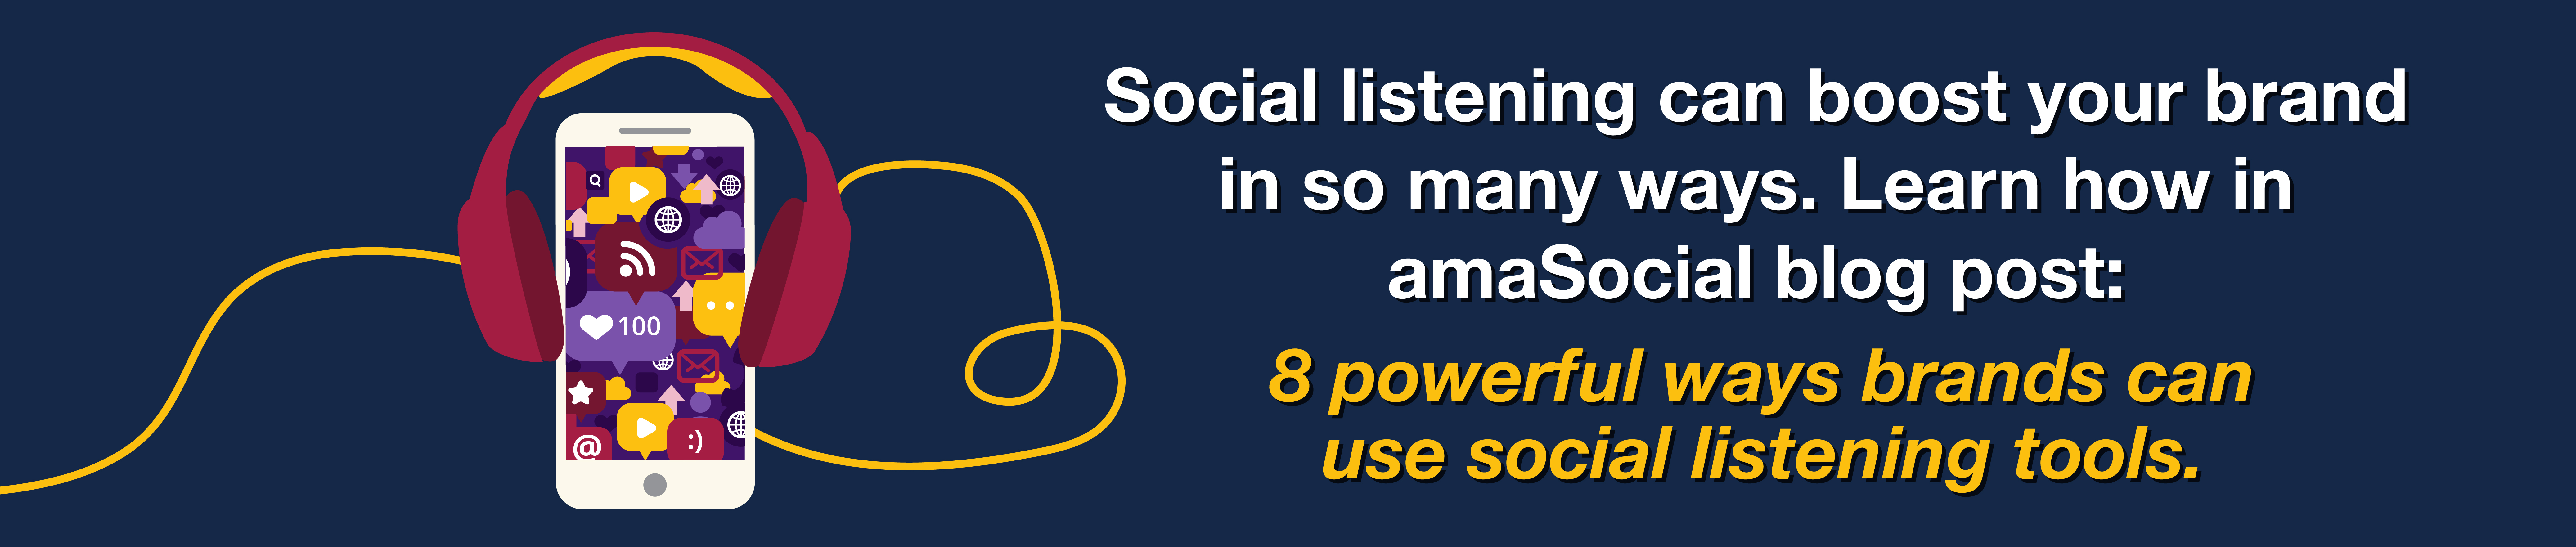 Find out how to use social listening tools in amaSocial's blog post